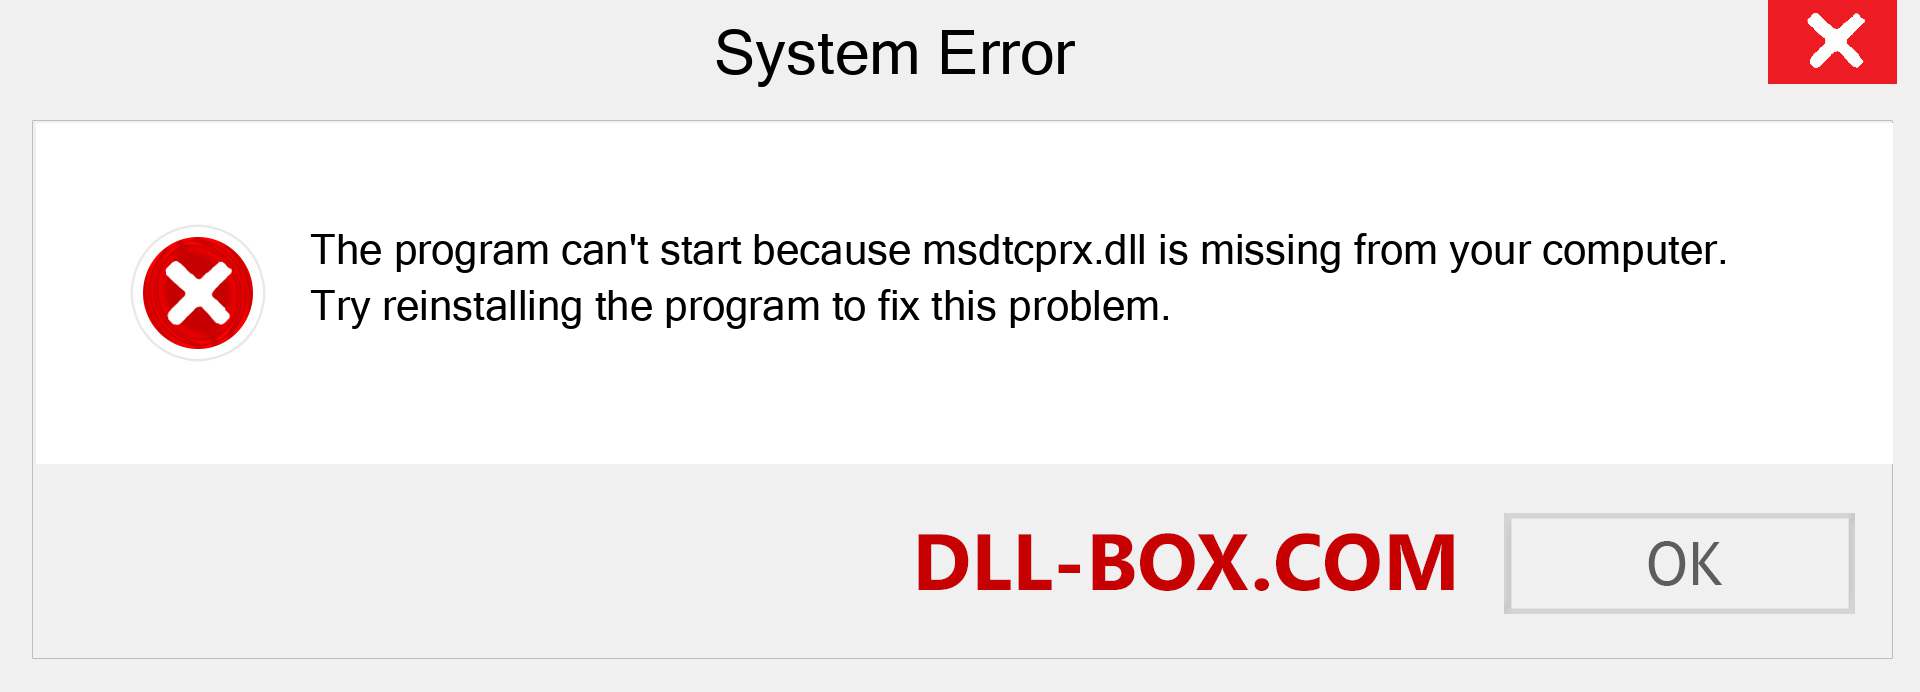  msdtcprx.dll file is missing?. Download for Windows 7, 8, 10 - Fix  msdtcprx dll Missing Error on Windows, photos, images